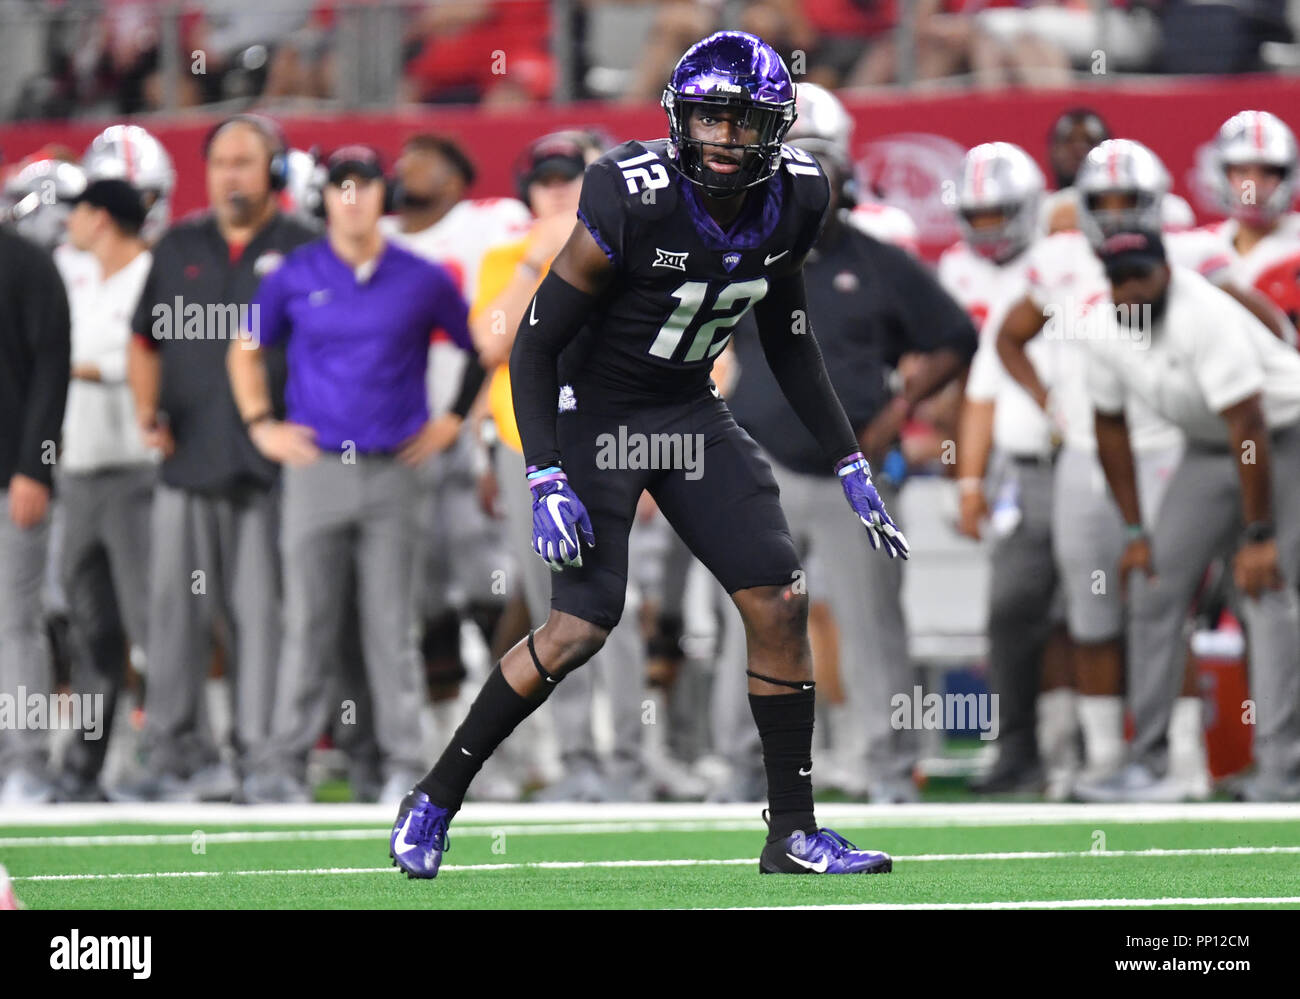 September 15, 2018: TCU Horned Frogs cornerback Jeff Gladney #12 in the AdvoCare Showdown NCAA Football game between the Ohio State Buckeyes and the TCU Horned Frogs at AT&T Stadium in Arlington, TX Ohio defeated TCU 40-28 Albert Pena/CSM Stock Photo